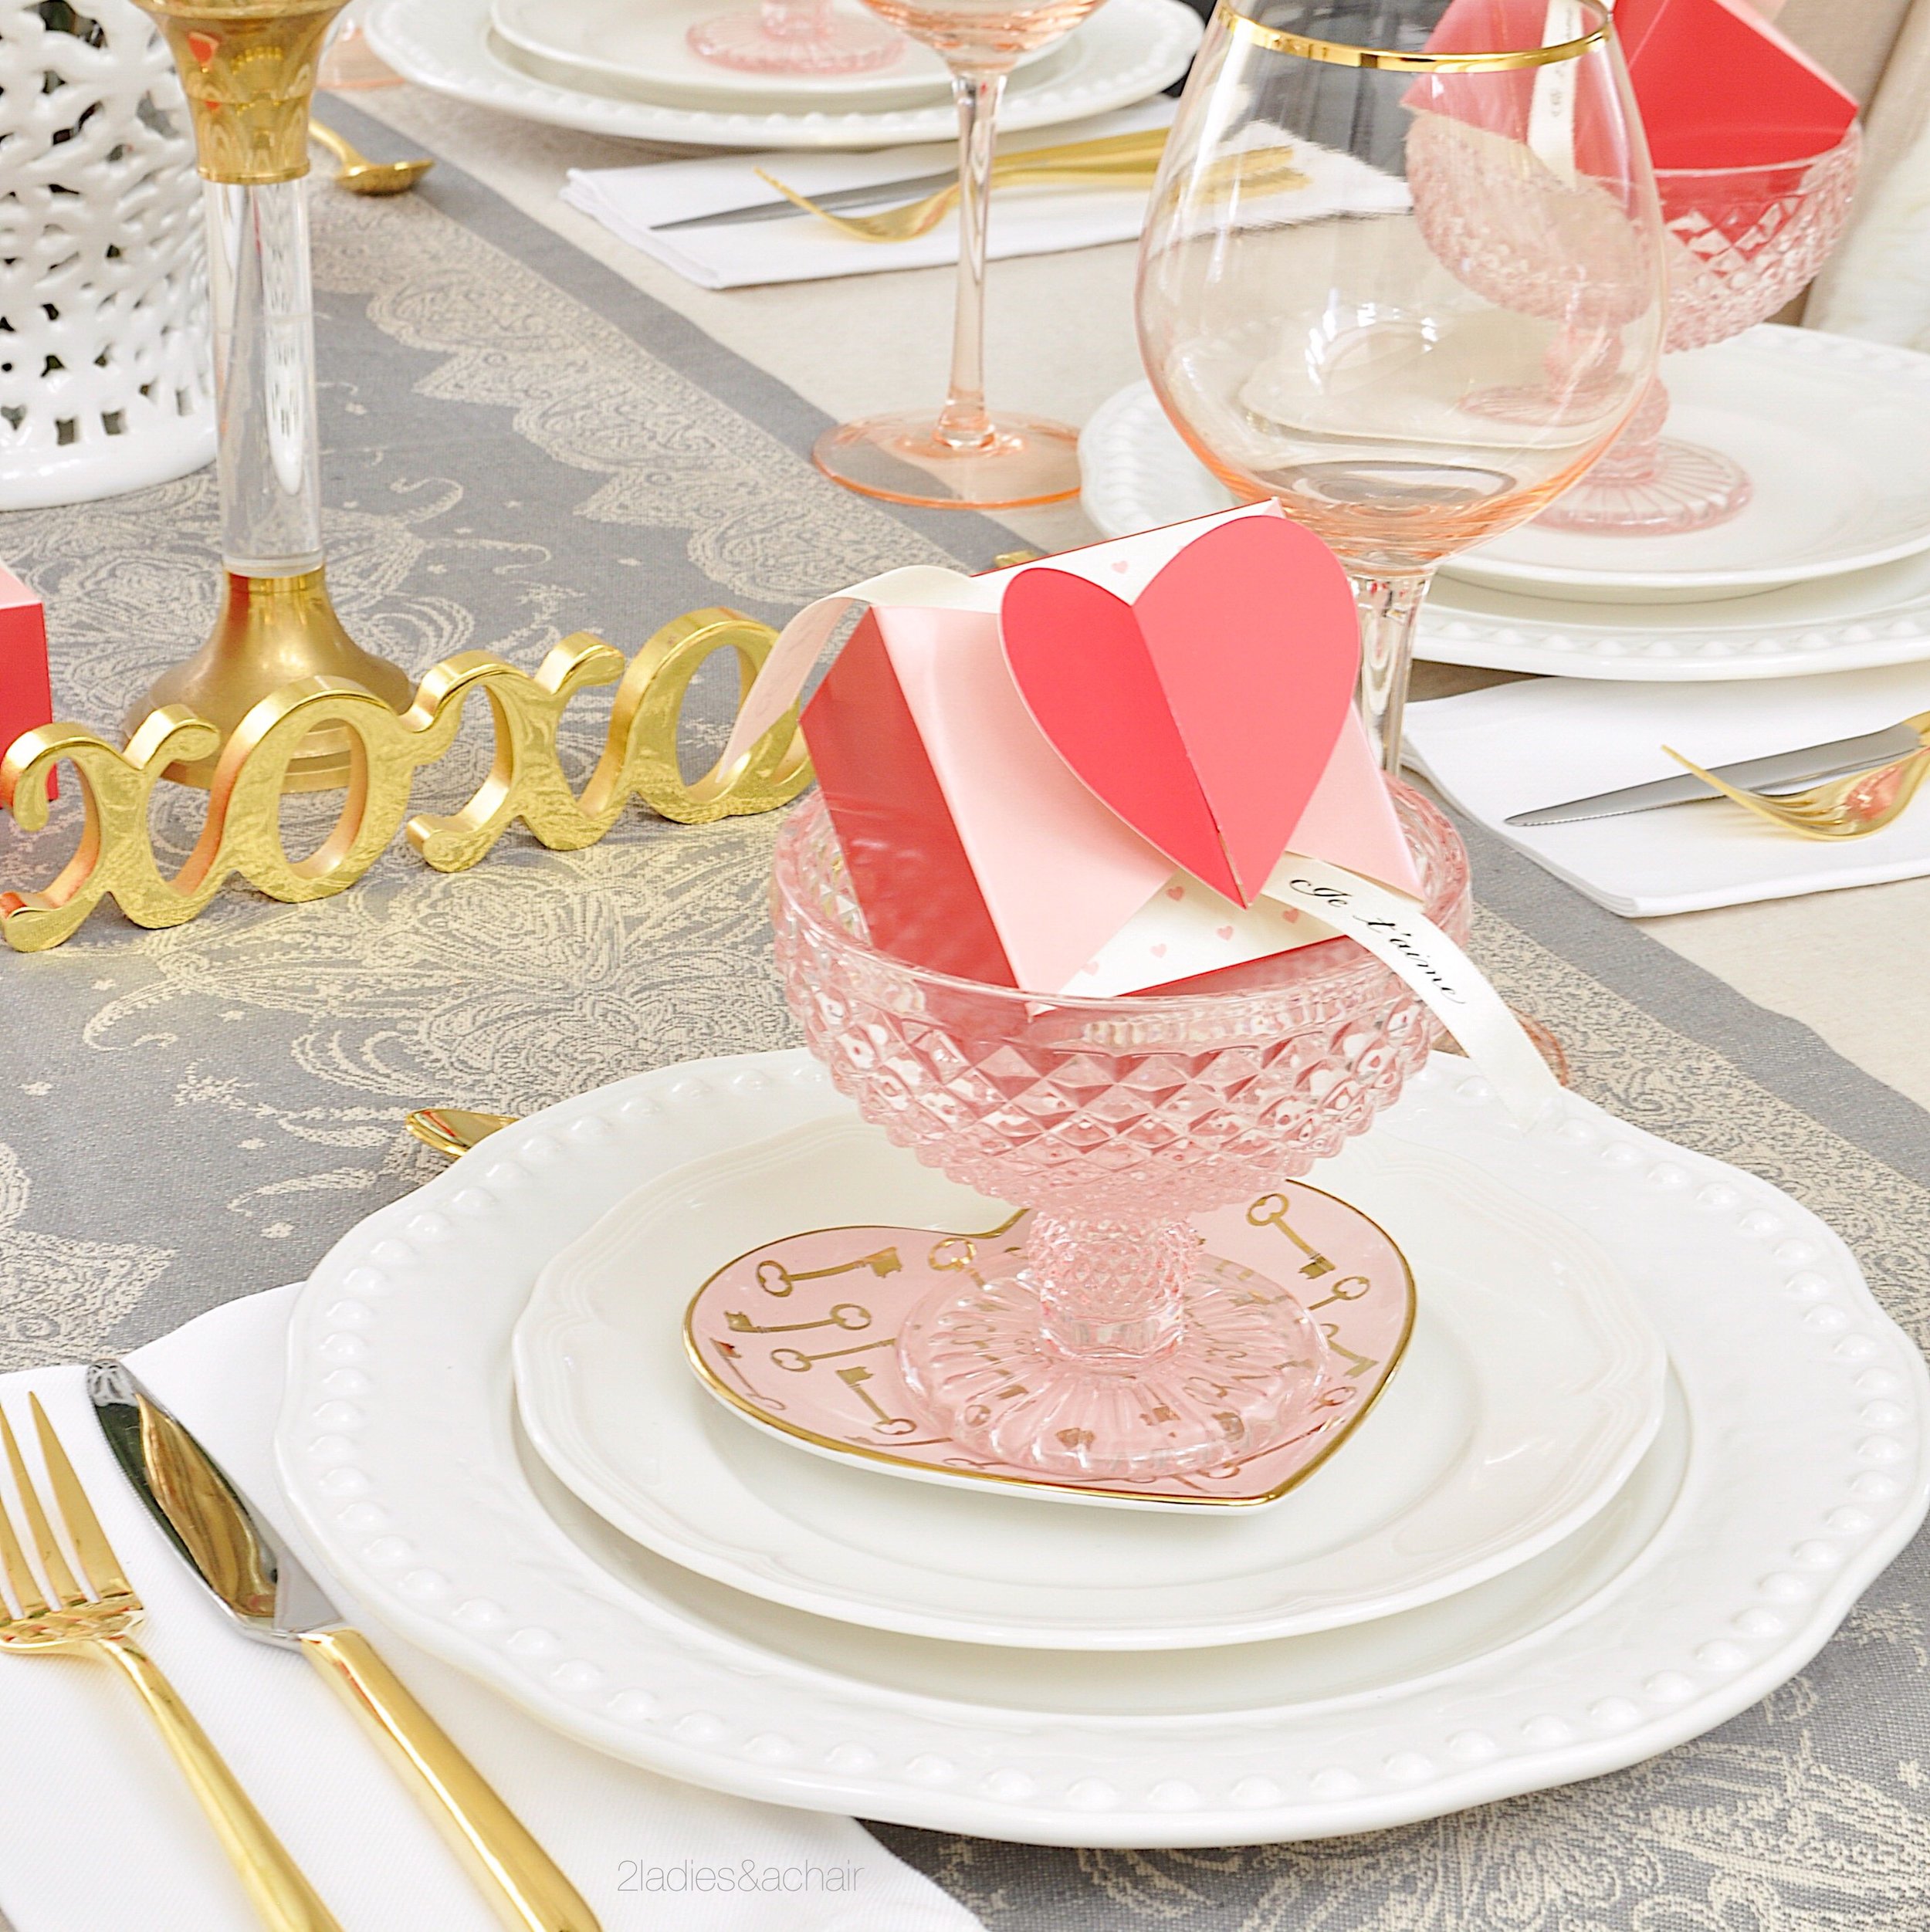 Easy Valentine Day Table Decoration Ideas